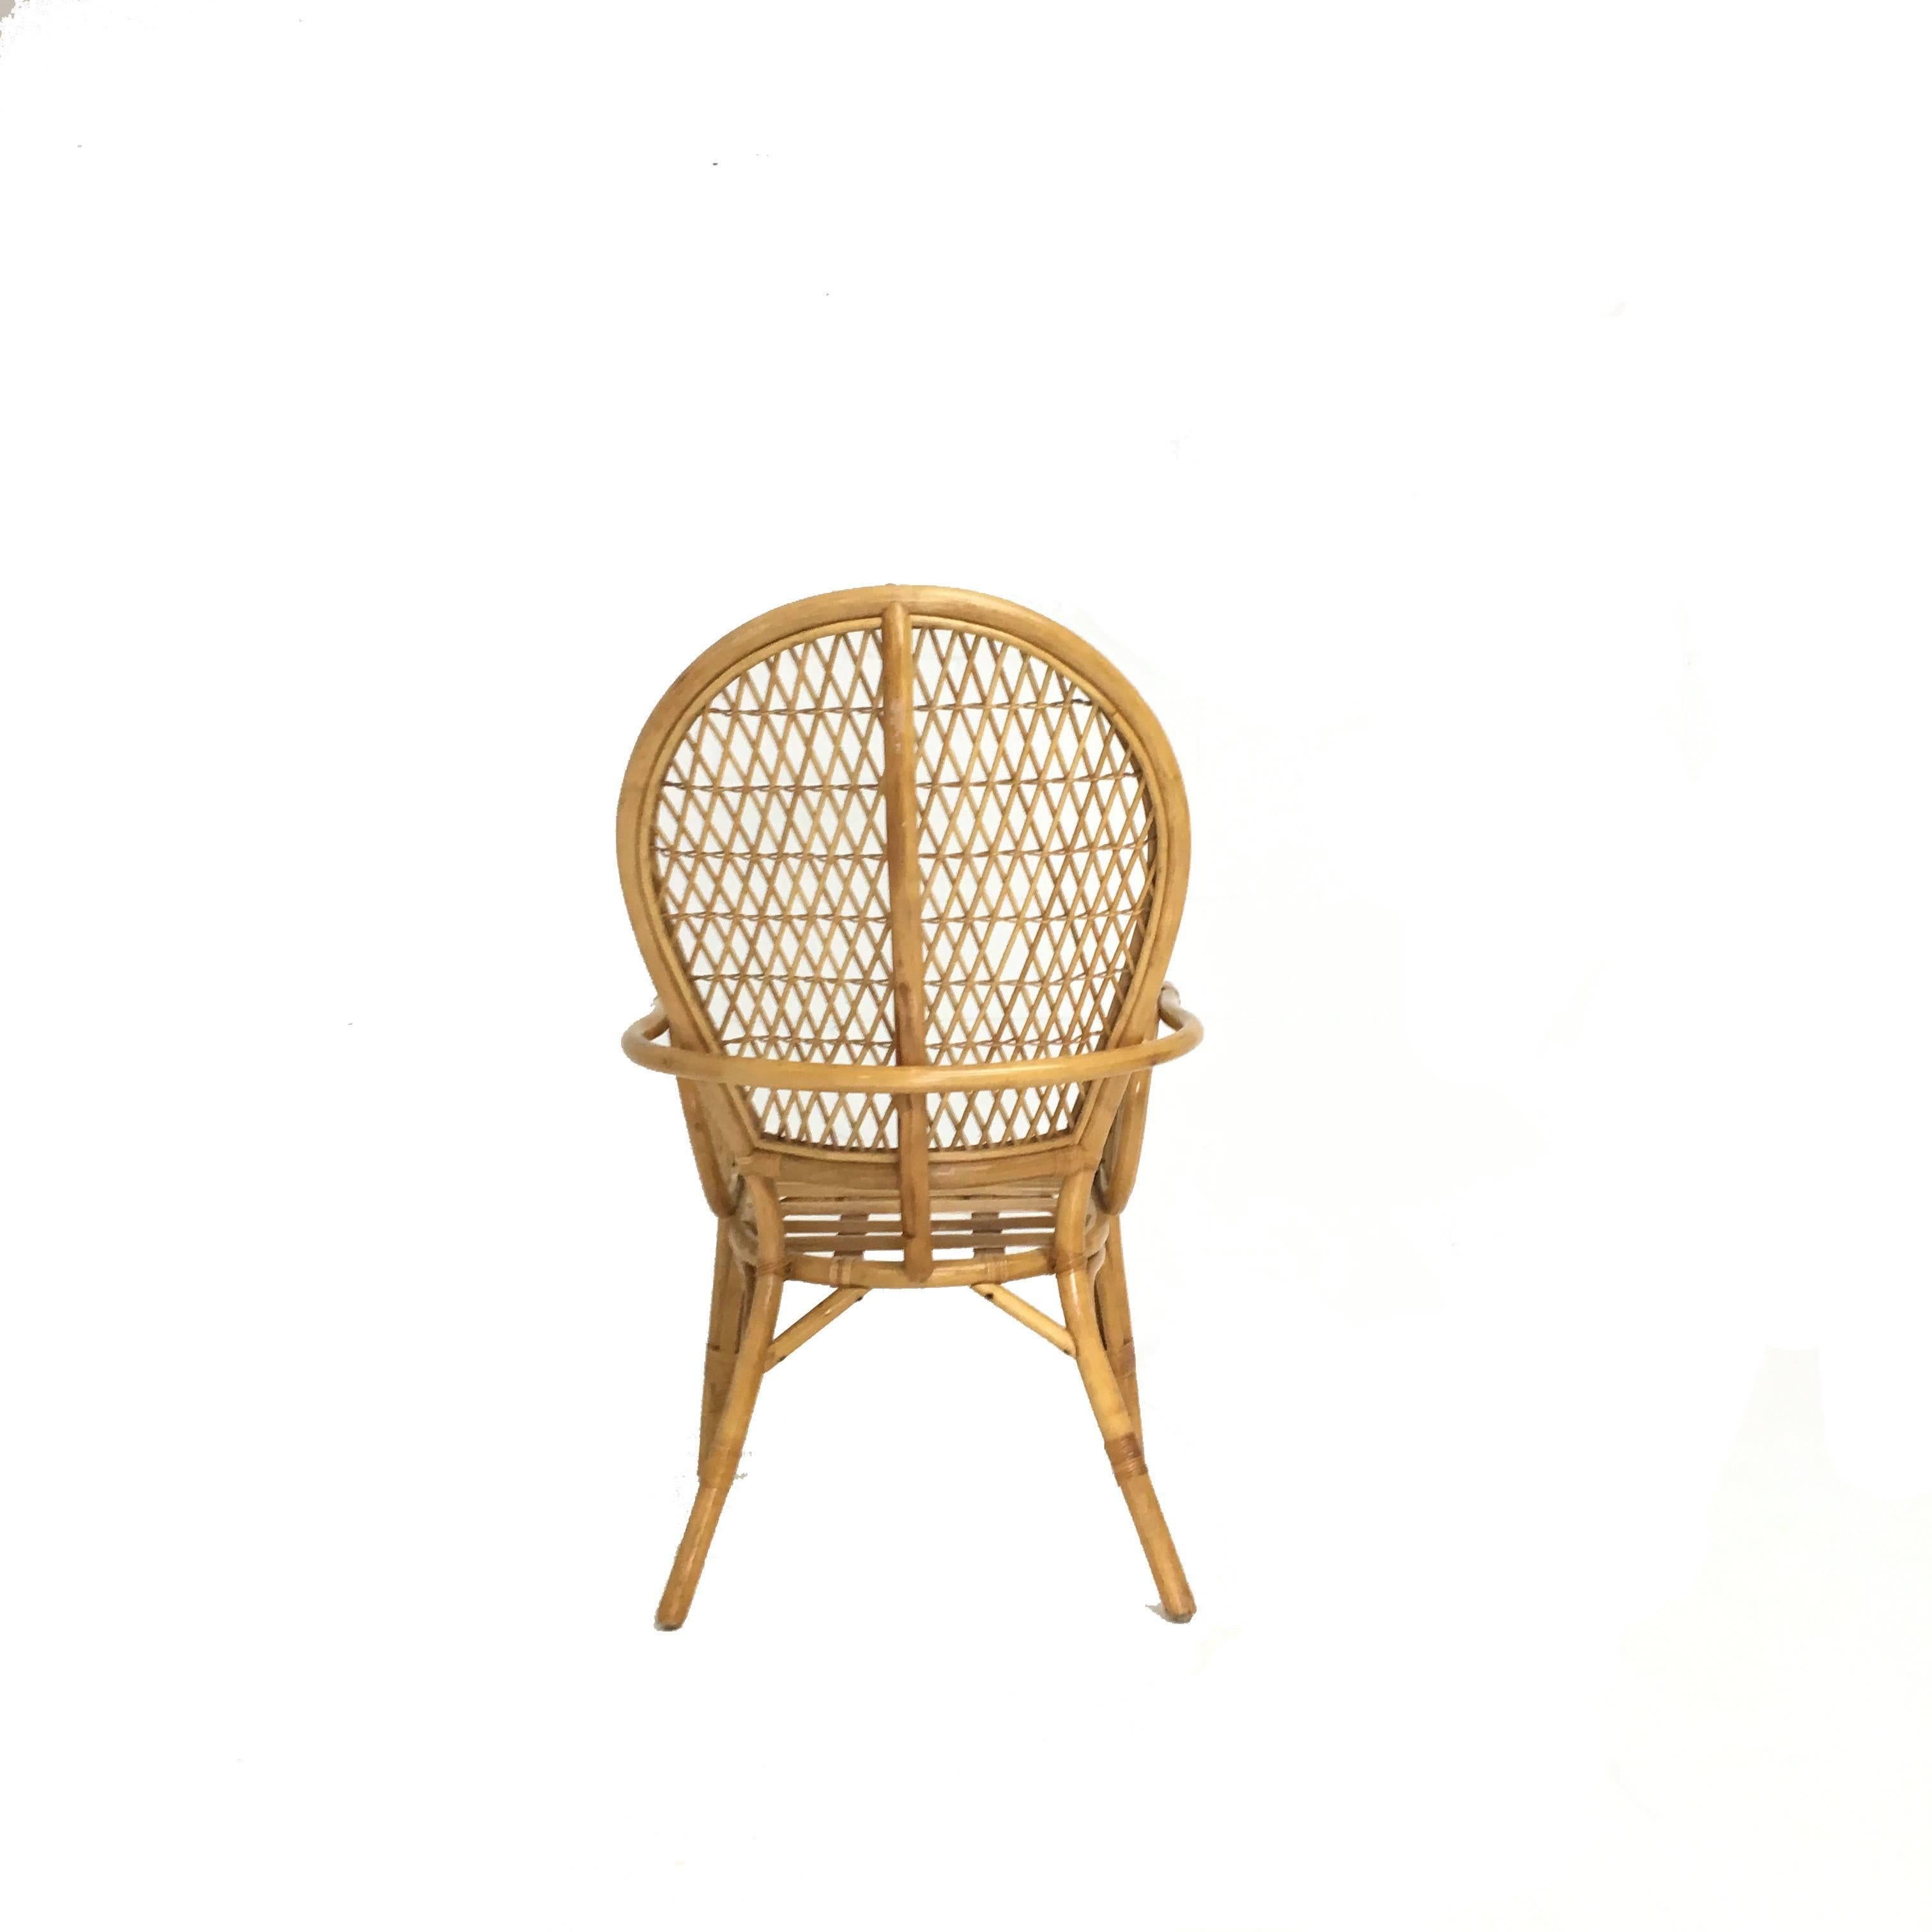 Midcentury Bamboo Fanback Peacock Chair In Good Condition For Sale In New Hyde Park, NY